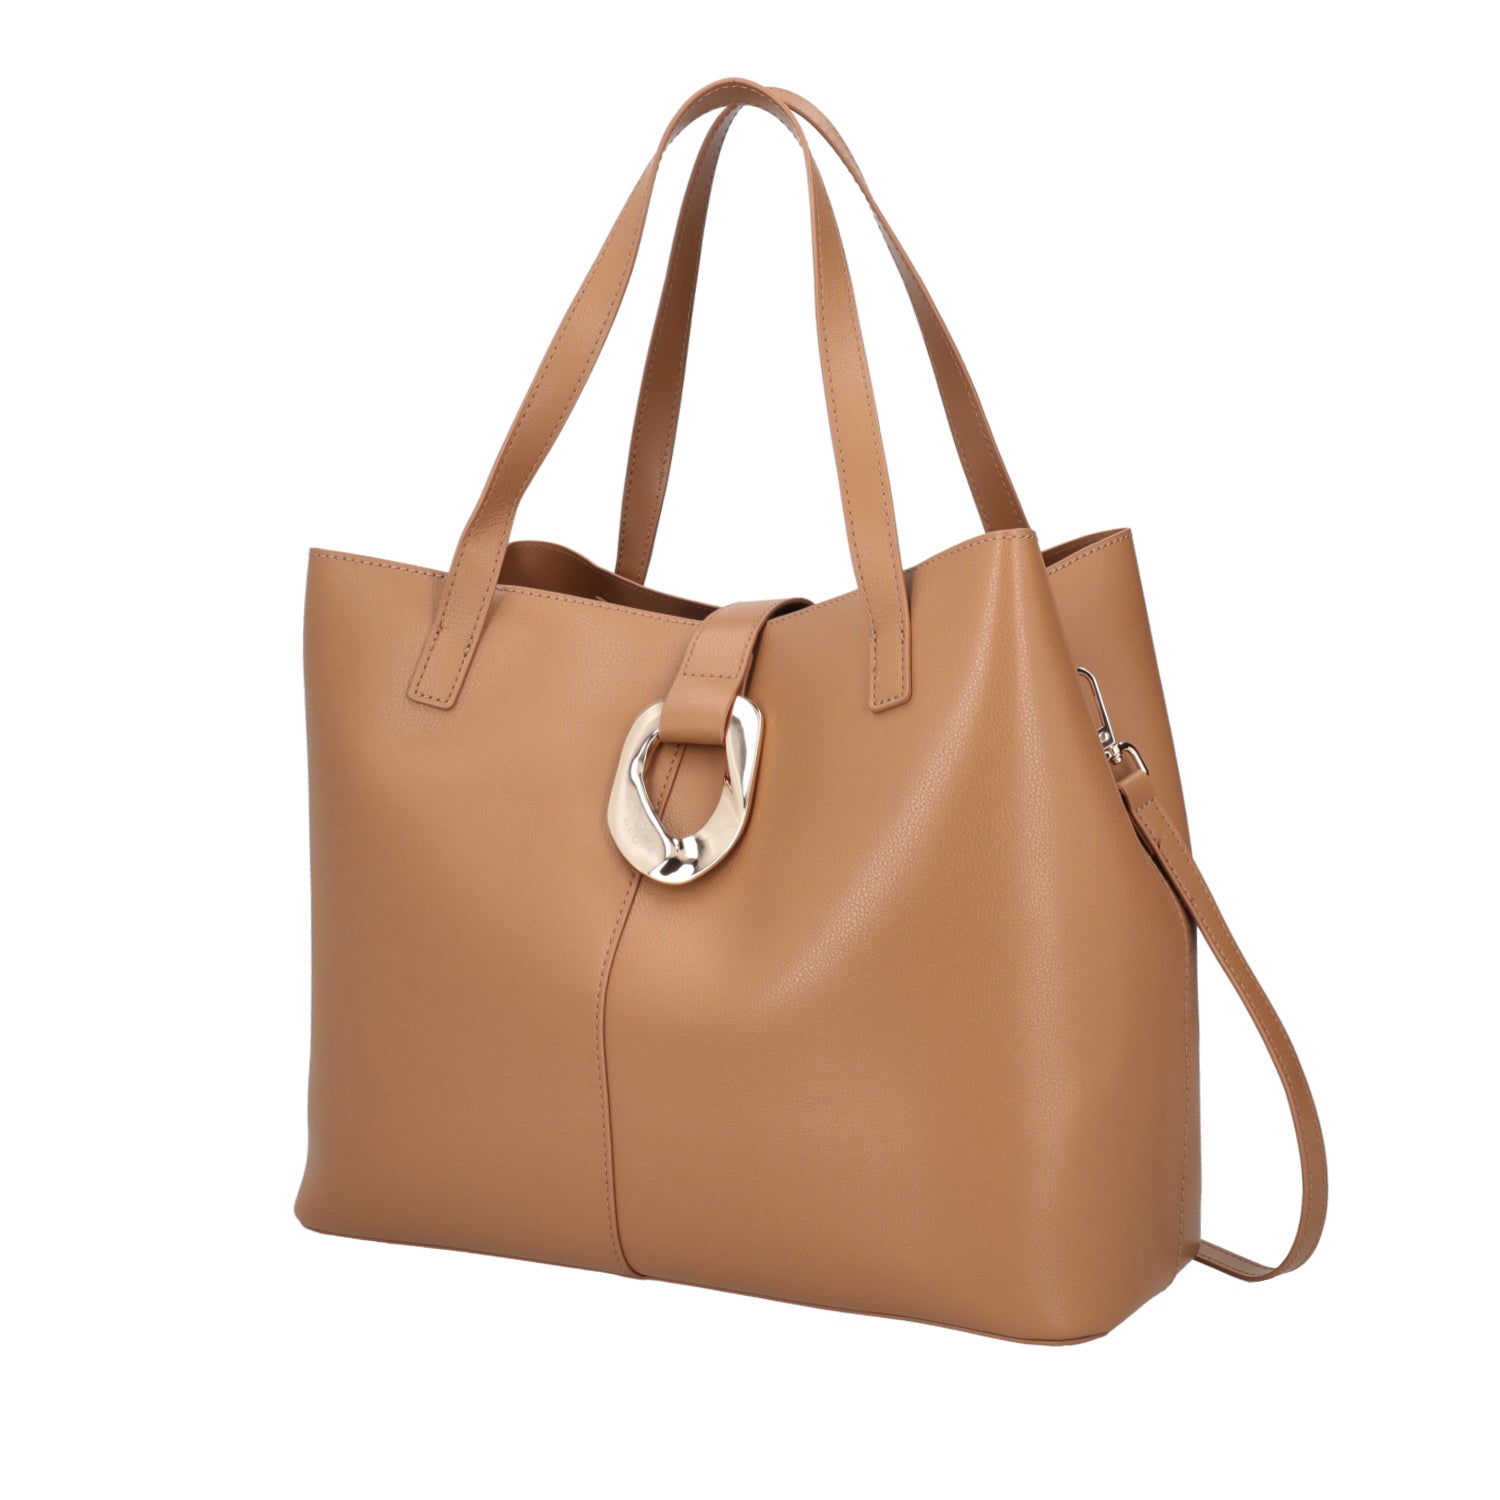 TAN PRIMULA SHOPPING BAG WITH GOLDEN ACCESSORY